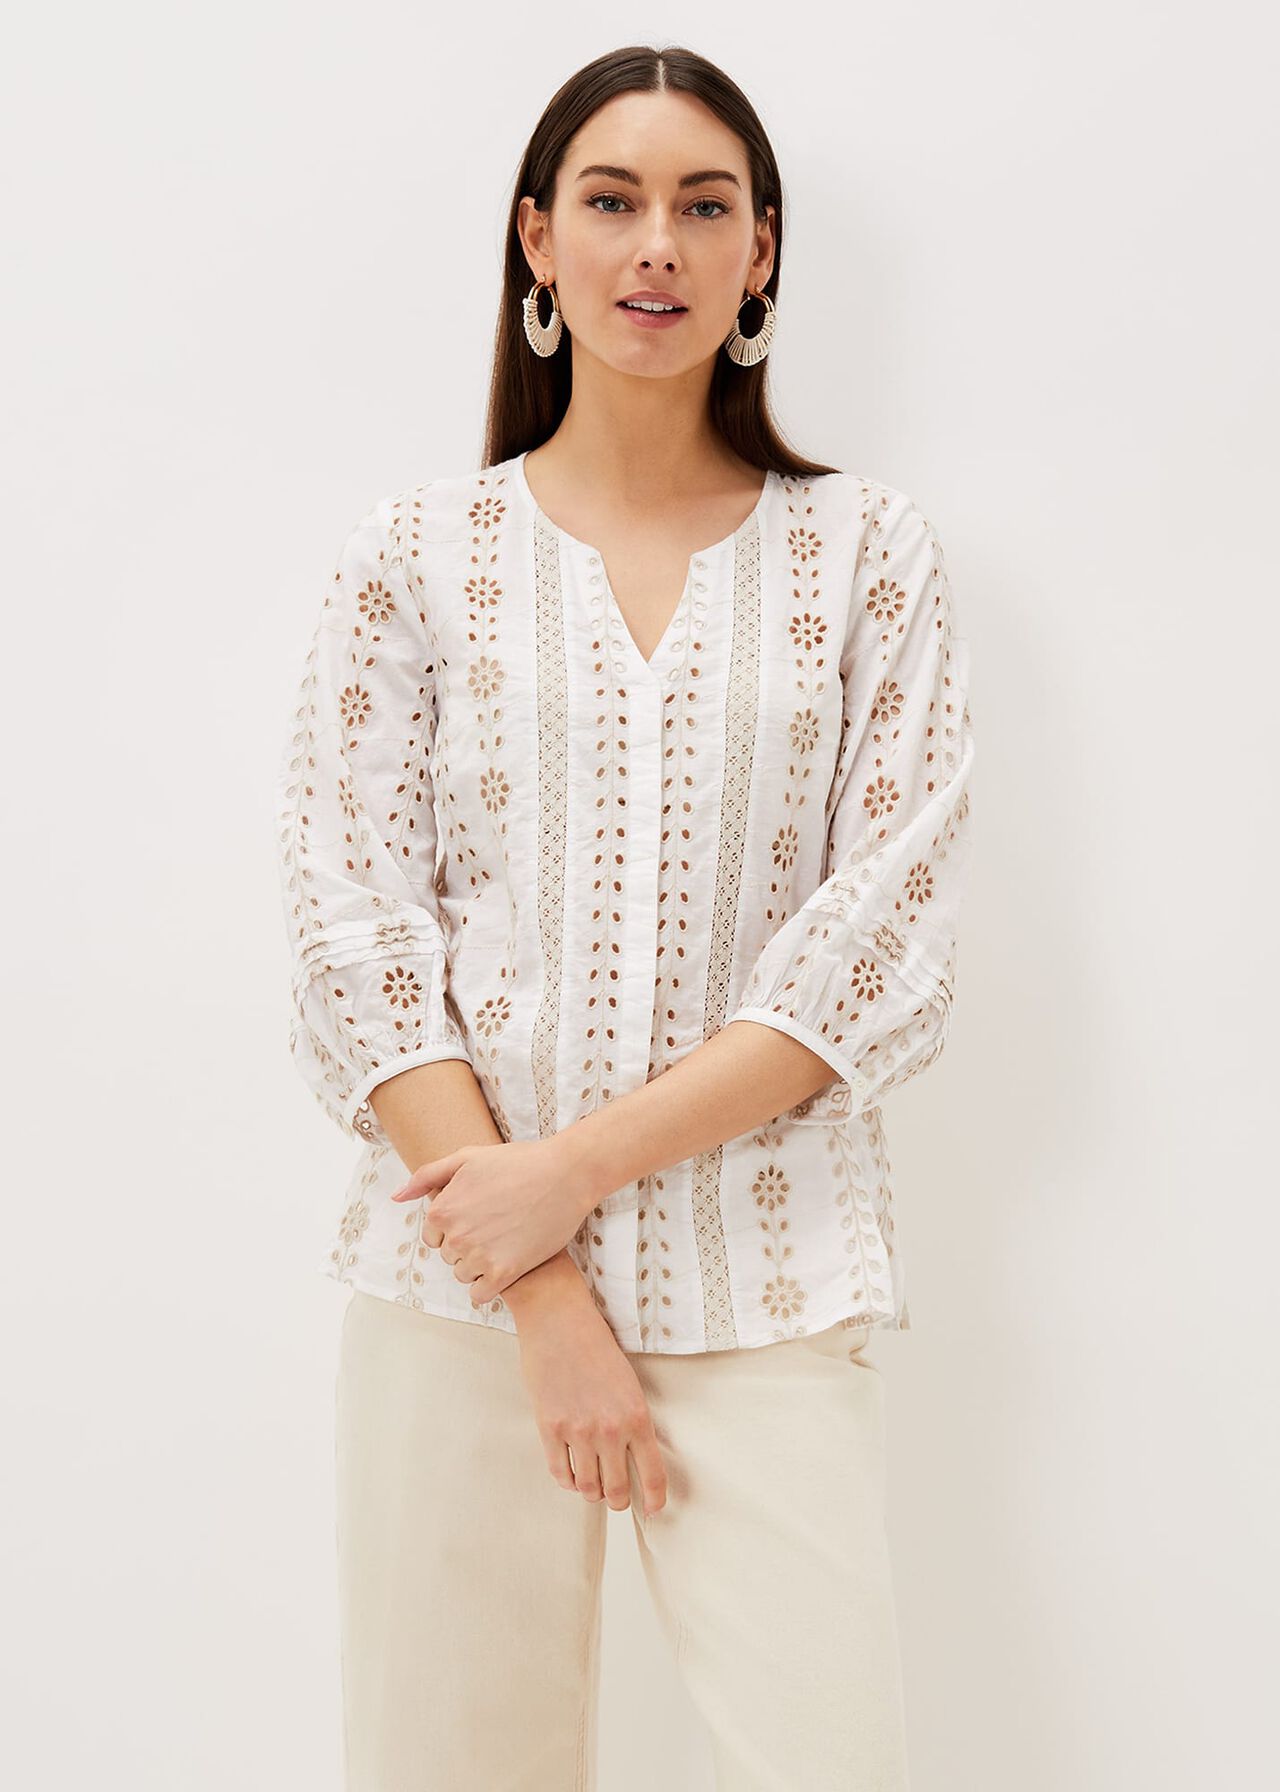 Caela Broderie Blouse | Phase Eight UK